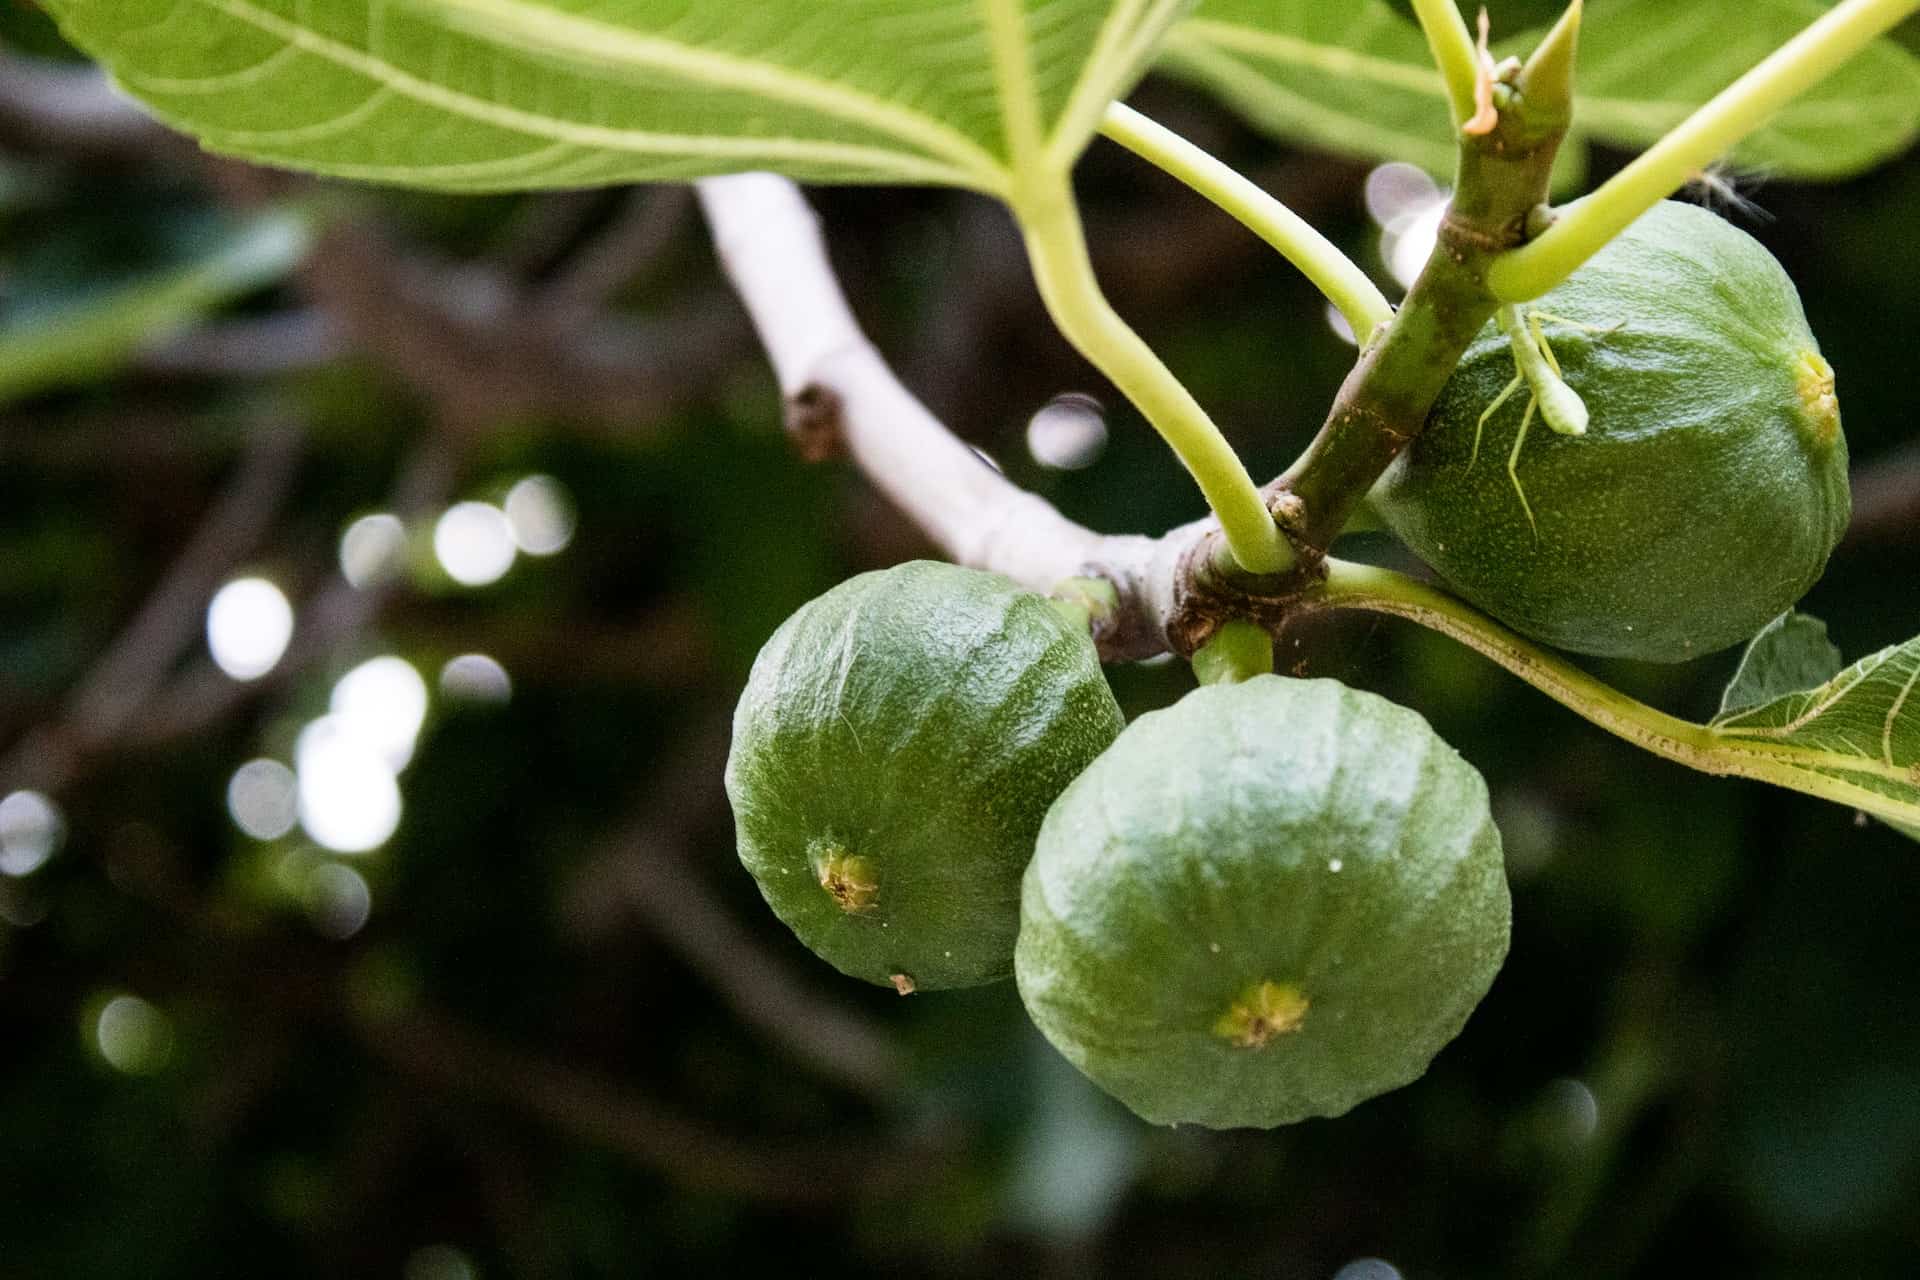 Raw figs on a tree